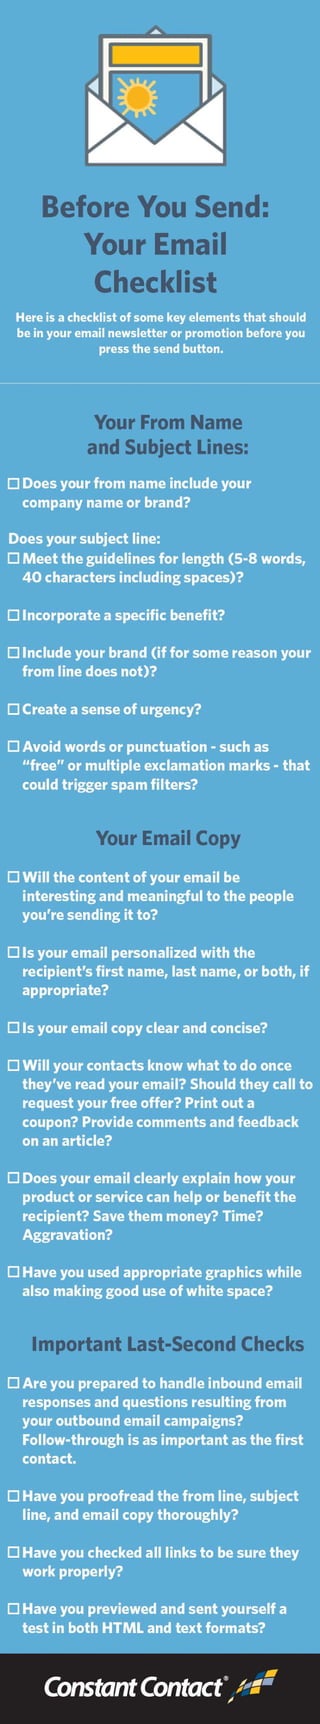 Before You Send: Your Email Checklist